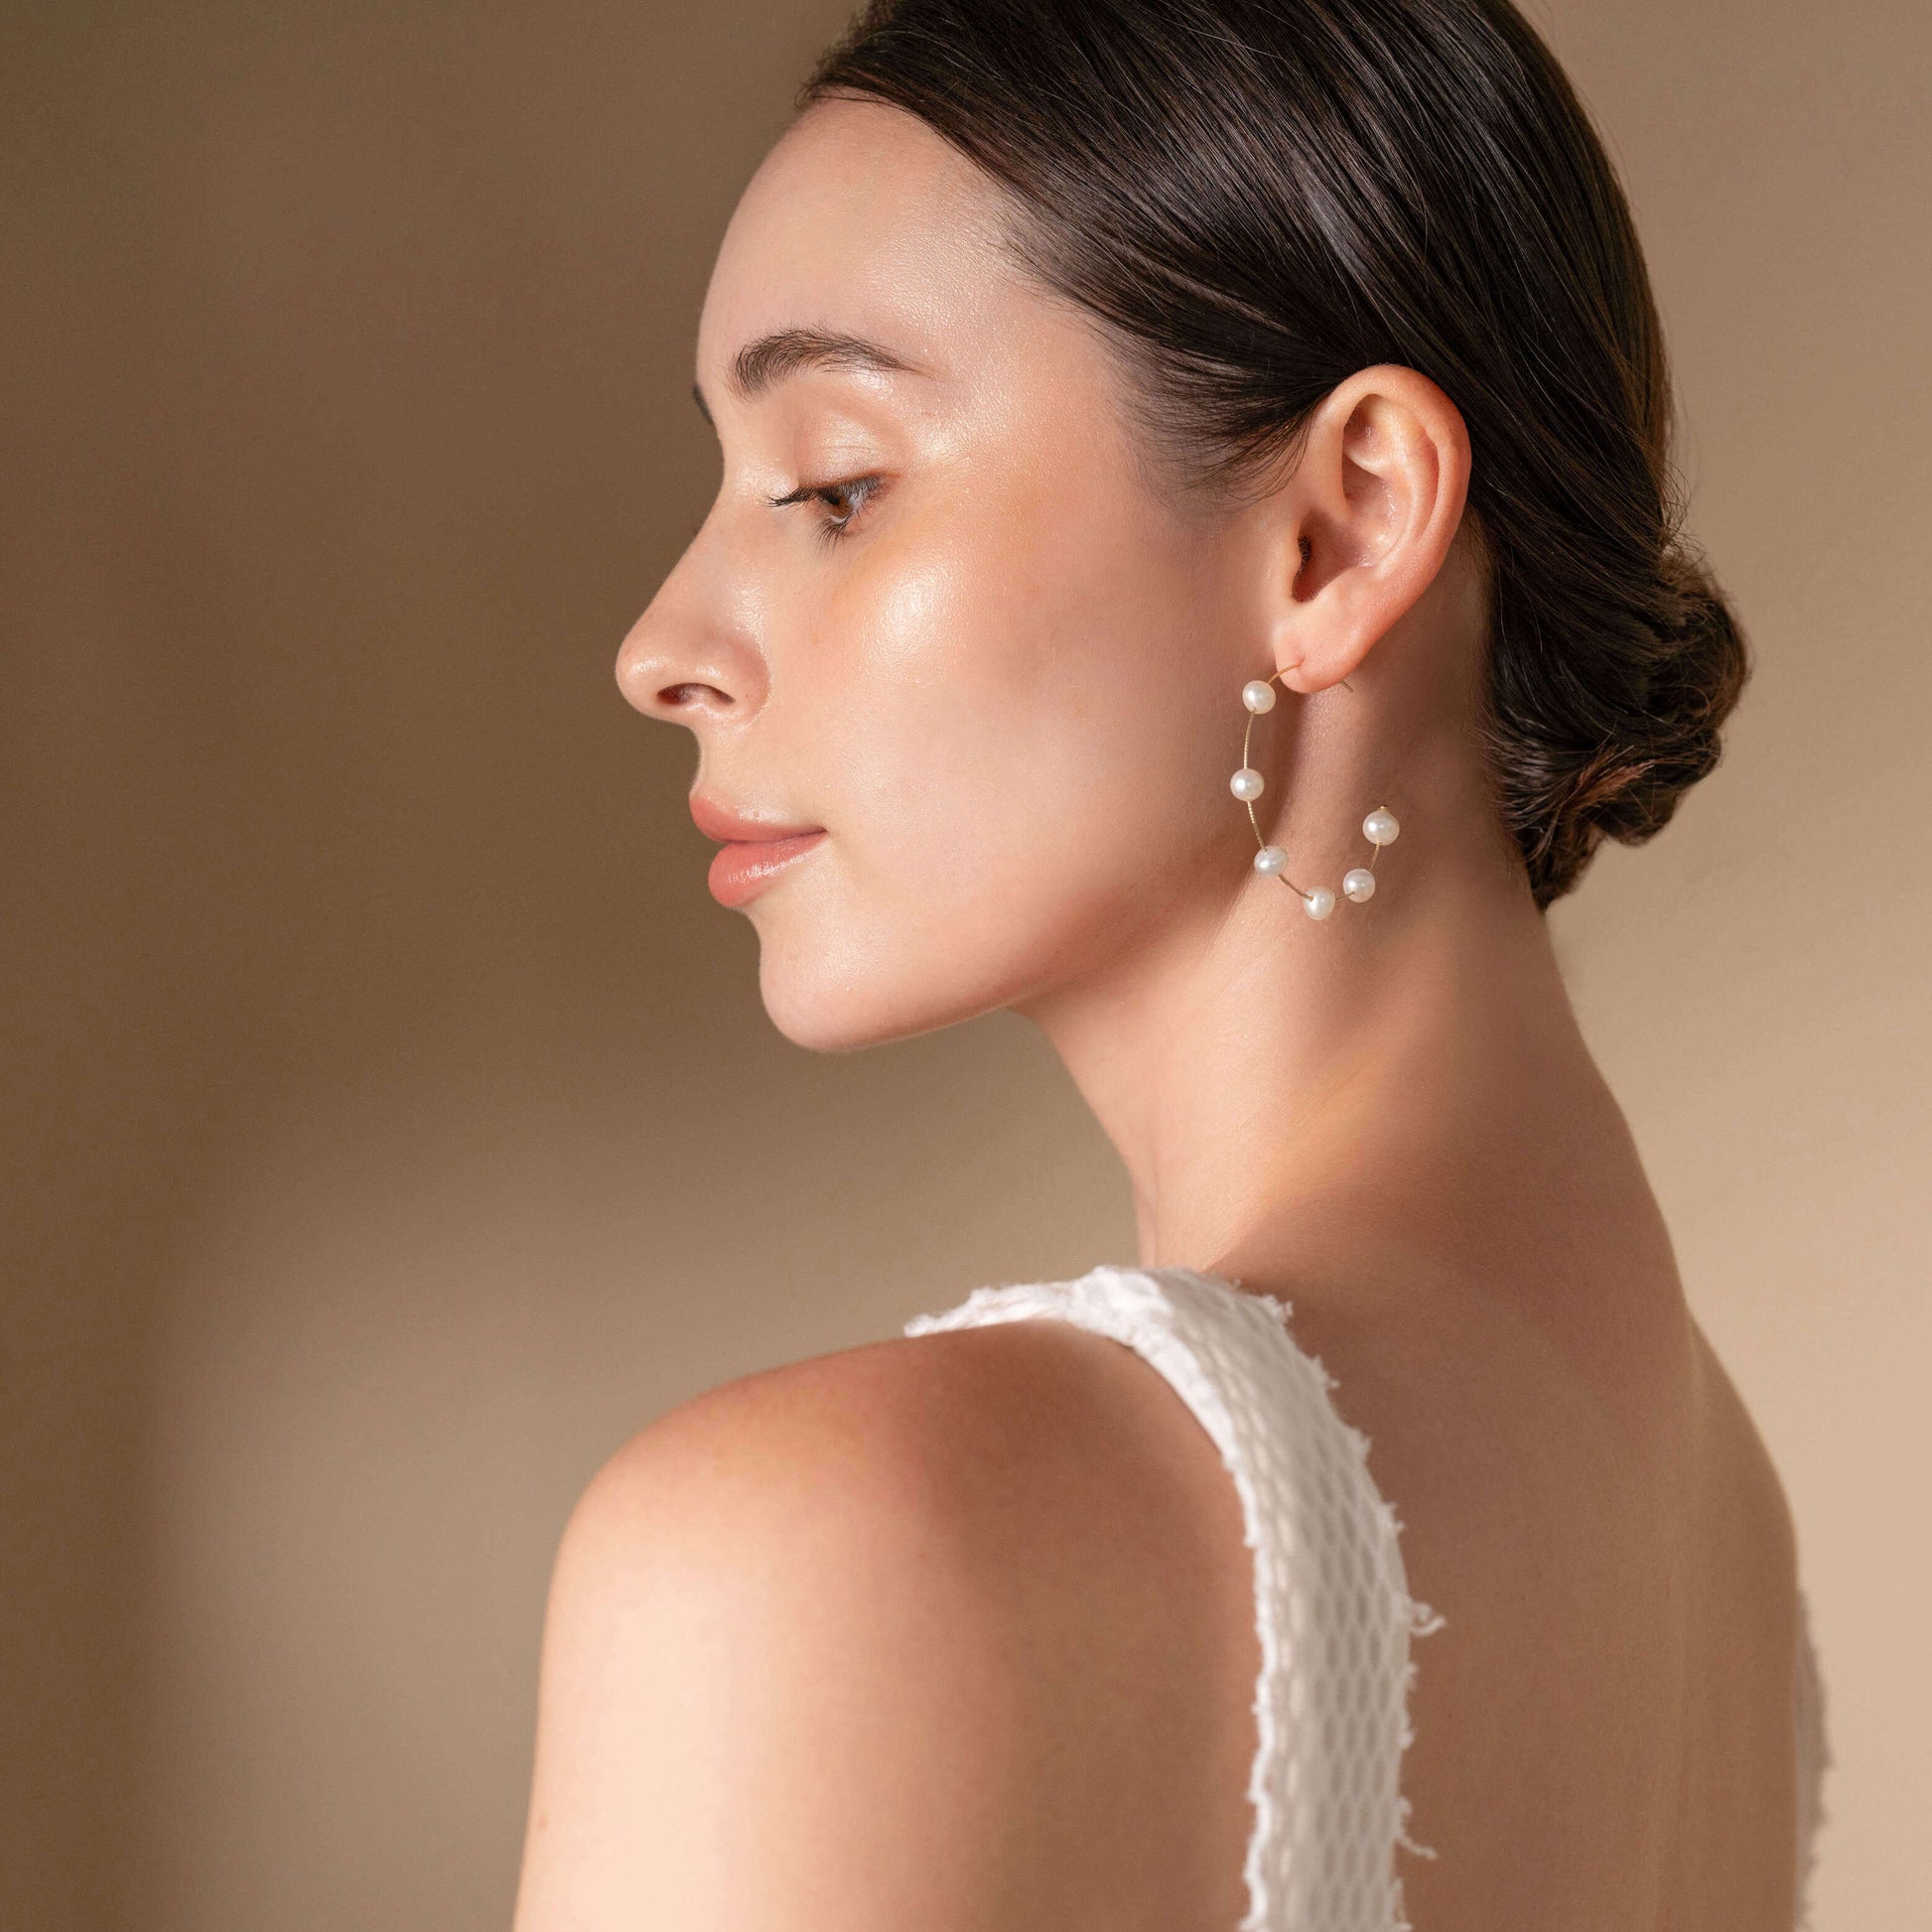 Enhance your look with a white top and Dot Pearl Hoop Piercing earrings like this woman.